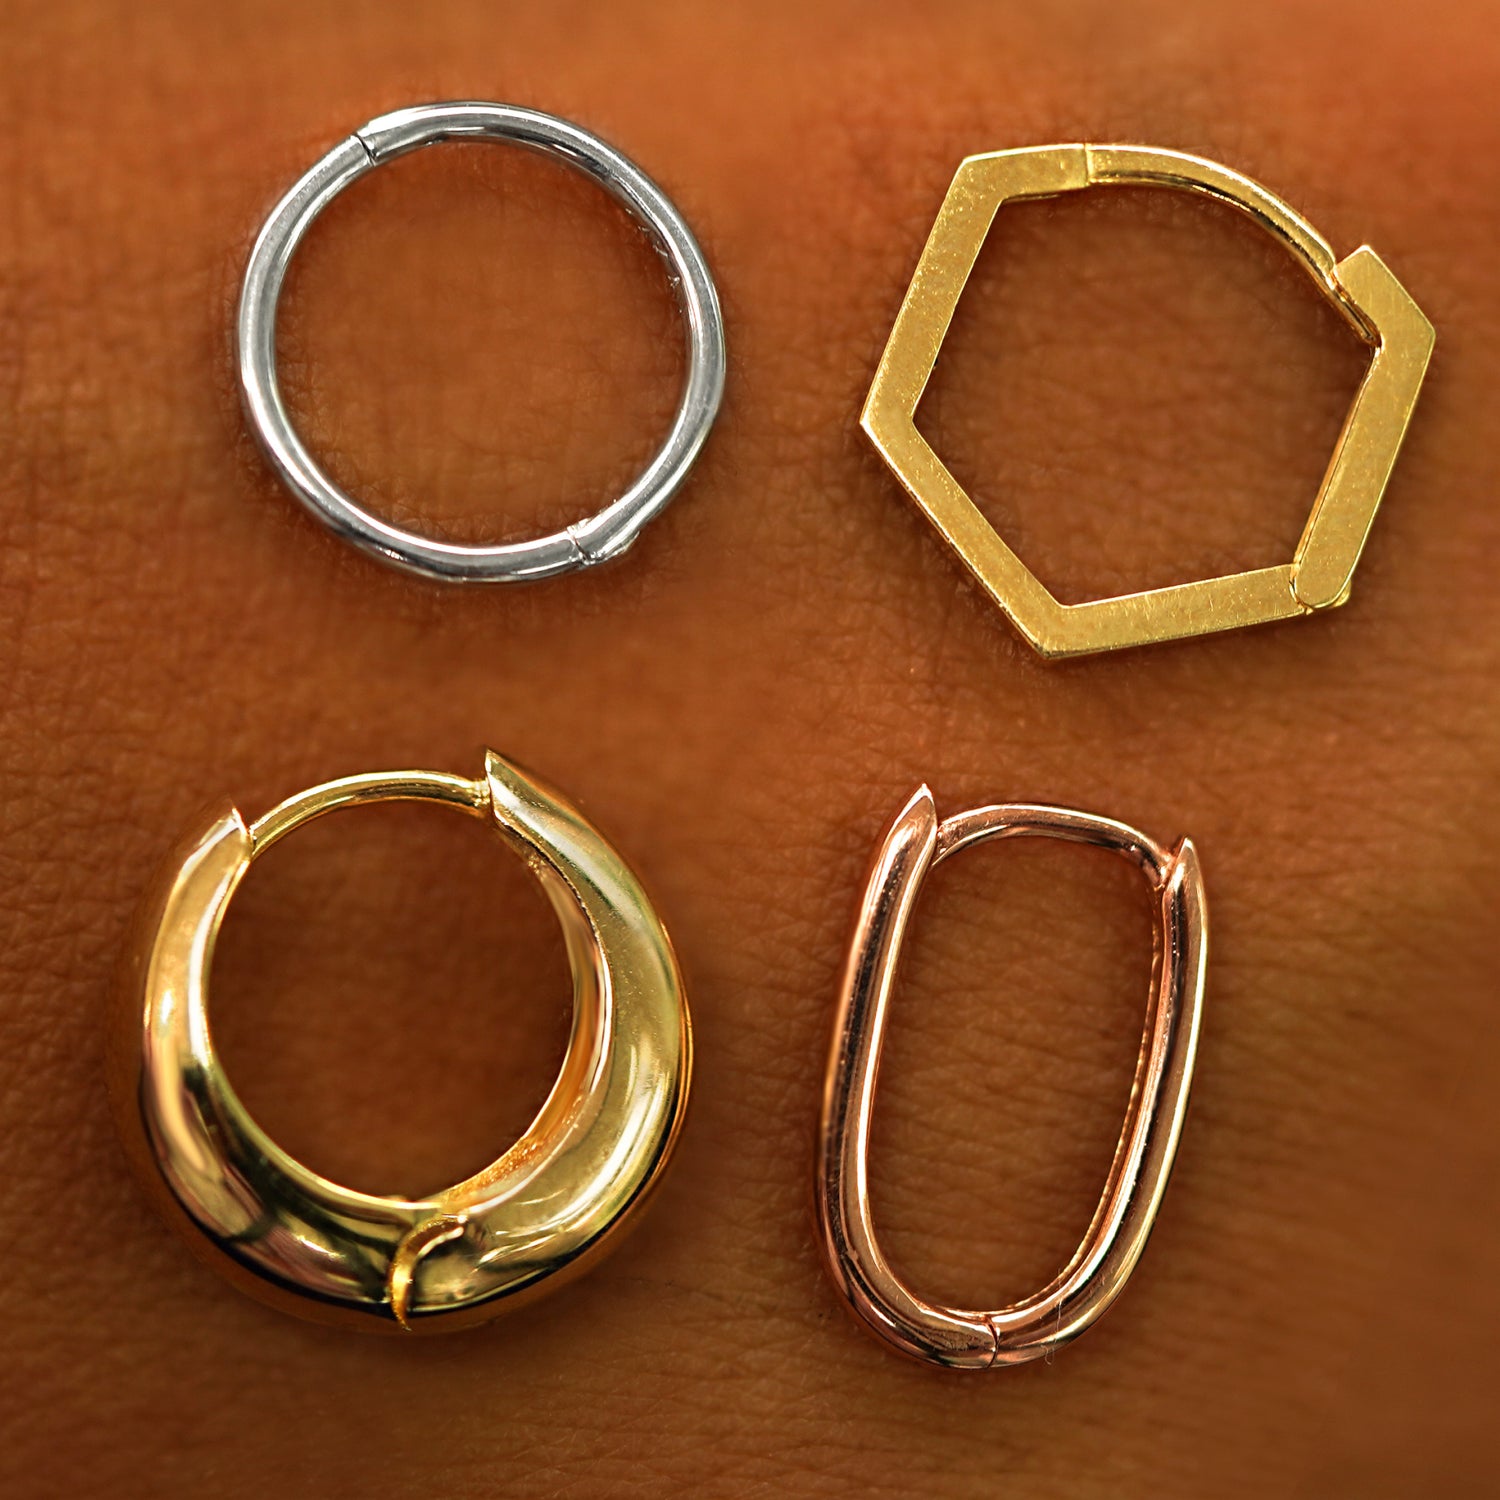 Four different geometric huggie hoops in different shades of 14k solid gold resting on the back of a model's hand